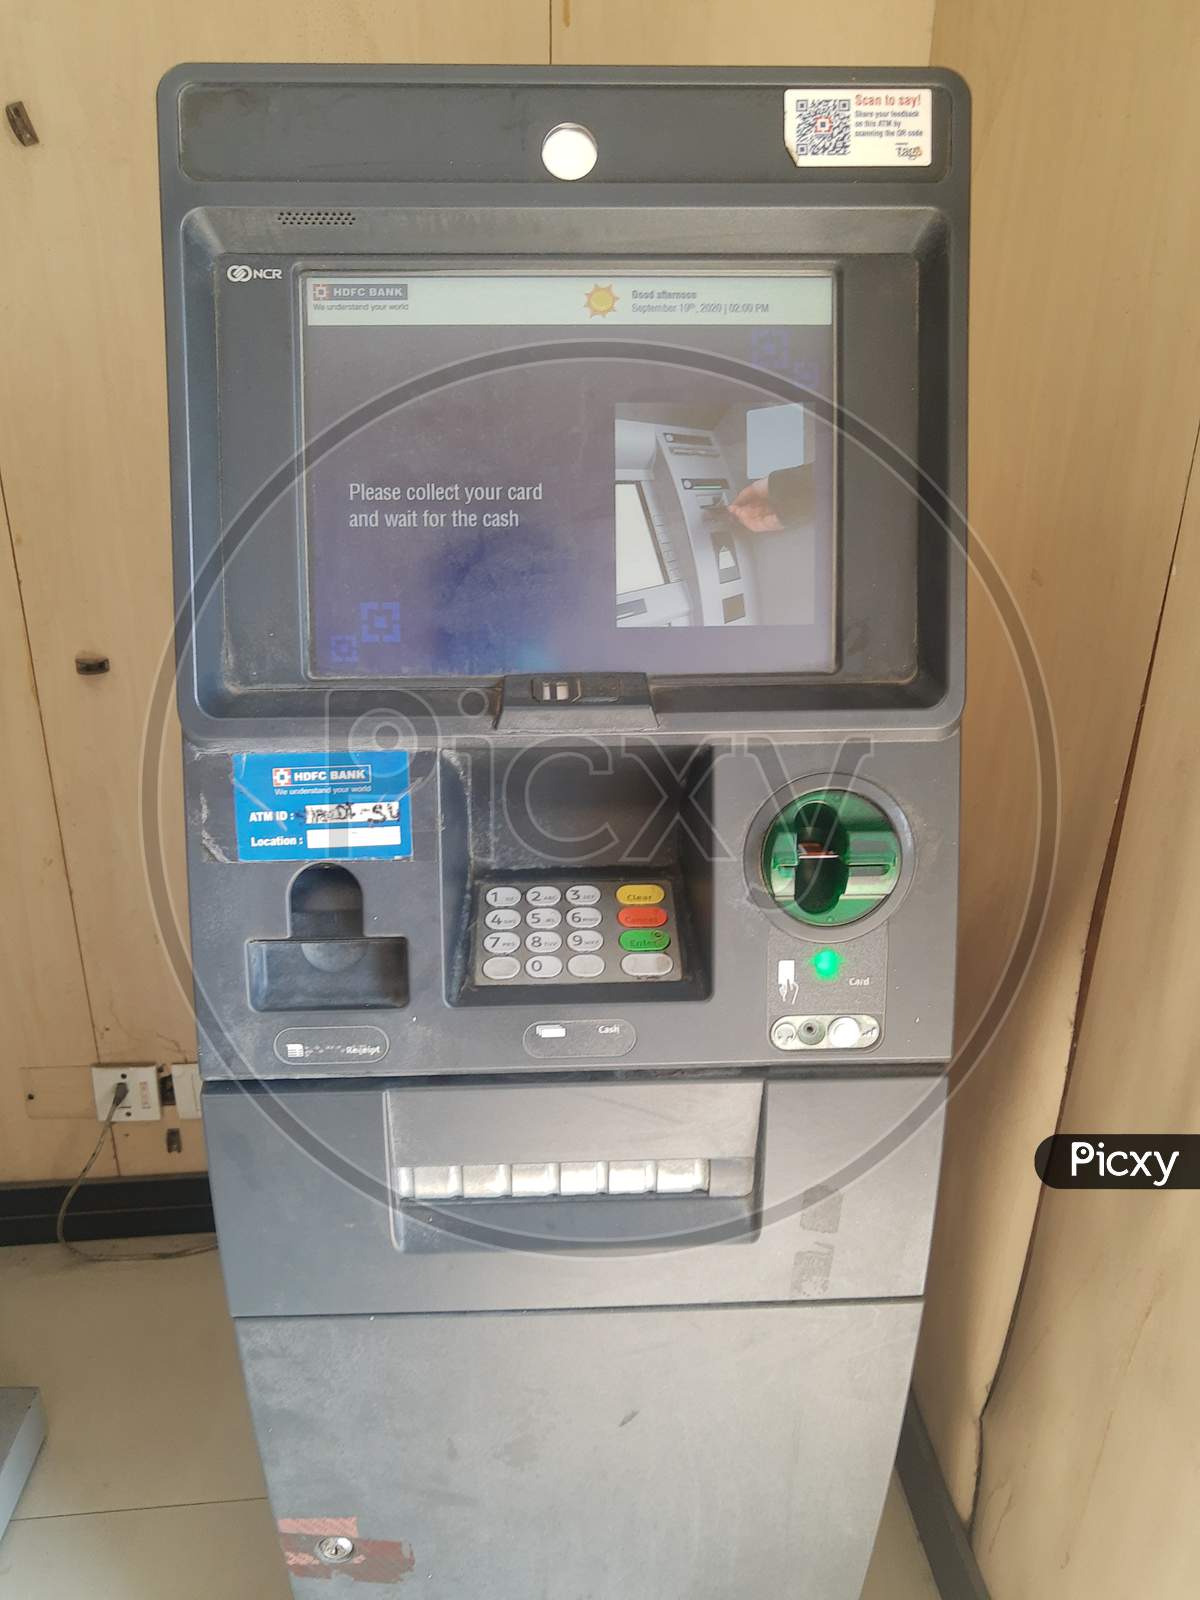 HDFC Bank ATM Machine Withdrawing Cash, Bank Account Information Transaction Transfer